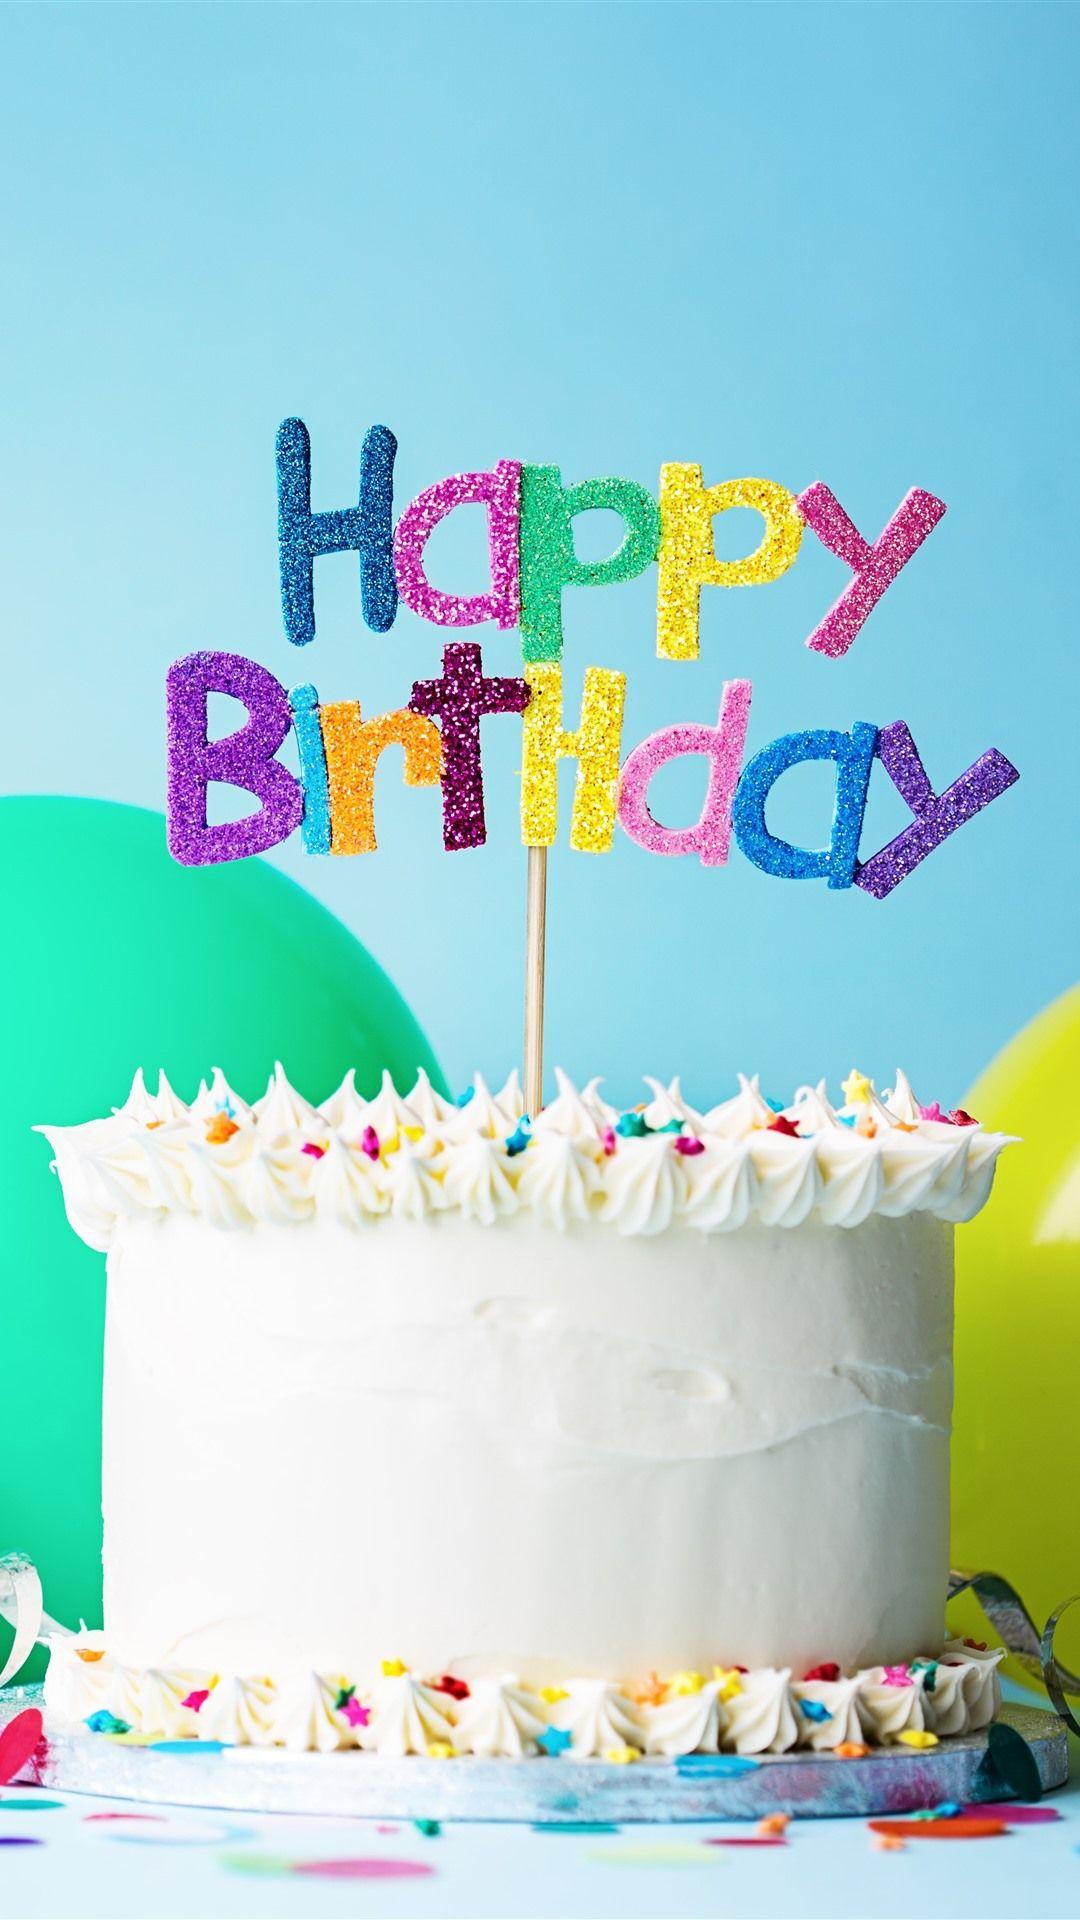 Happy Birthday Iphone Wallpapers Top Free Happy Birthday Iphone Backgrounds Wallpaperaccess